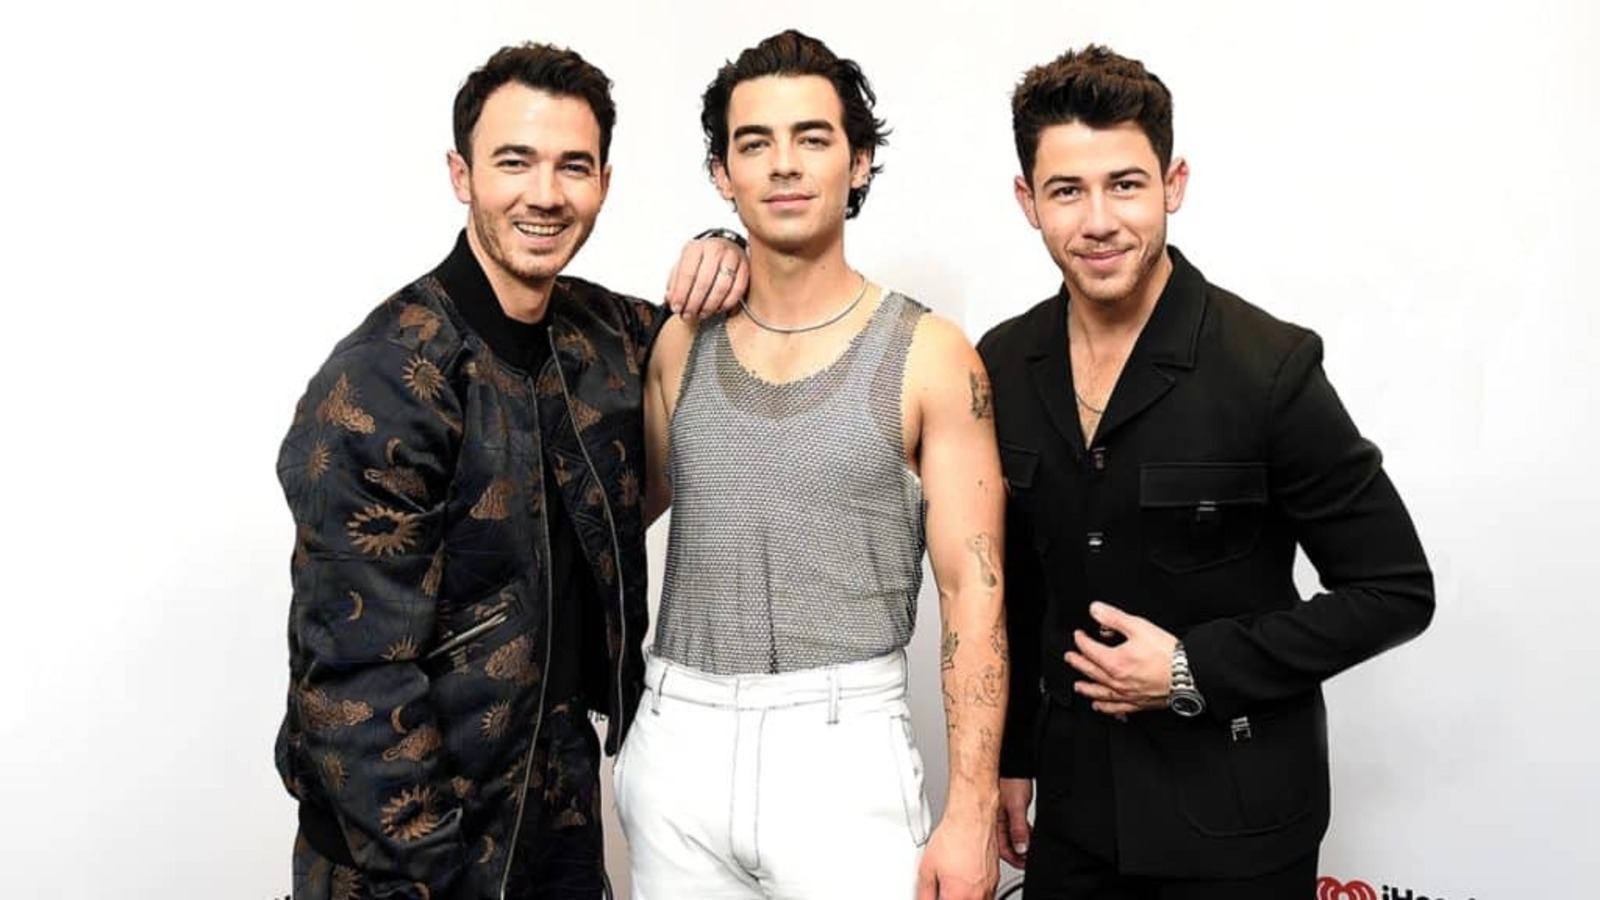 Wicked, two of the Jonas Brothers had auditioned for a lead role (the same)?